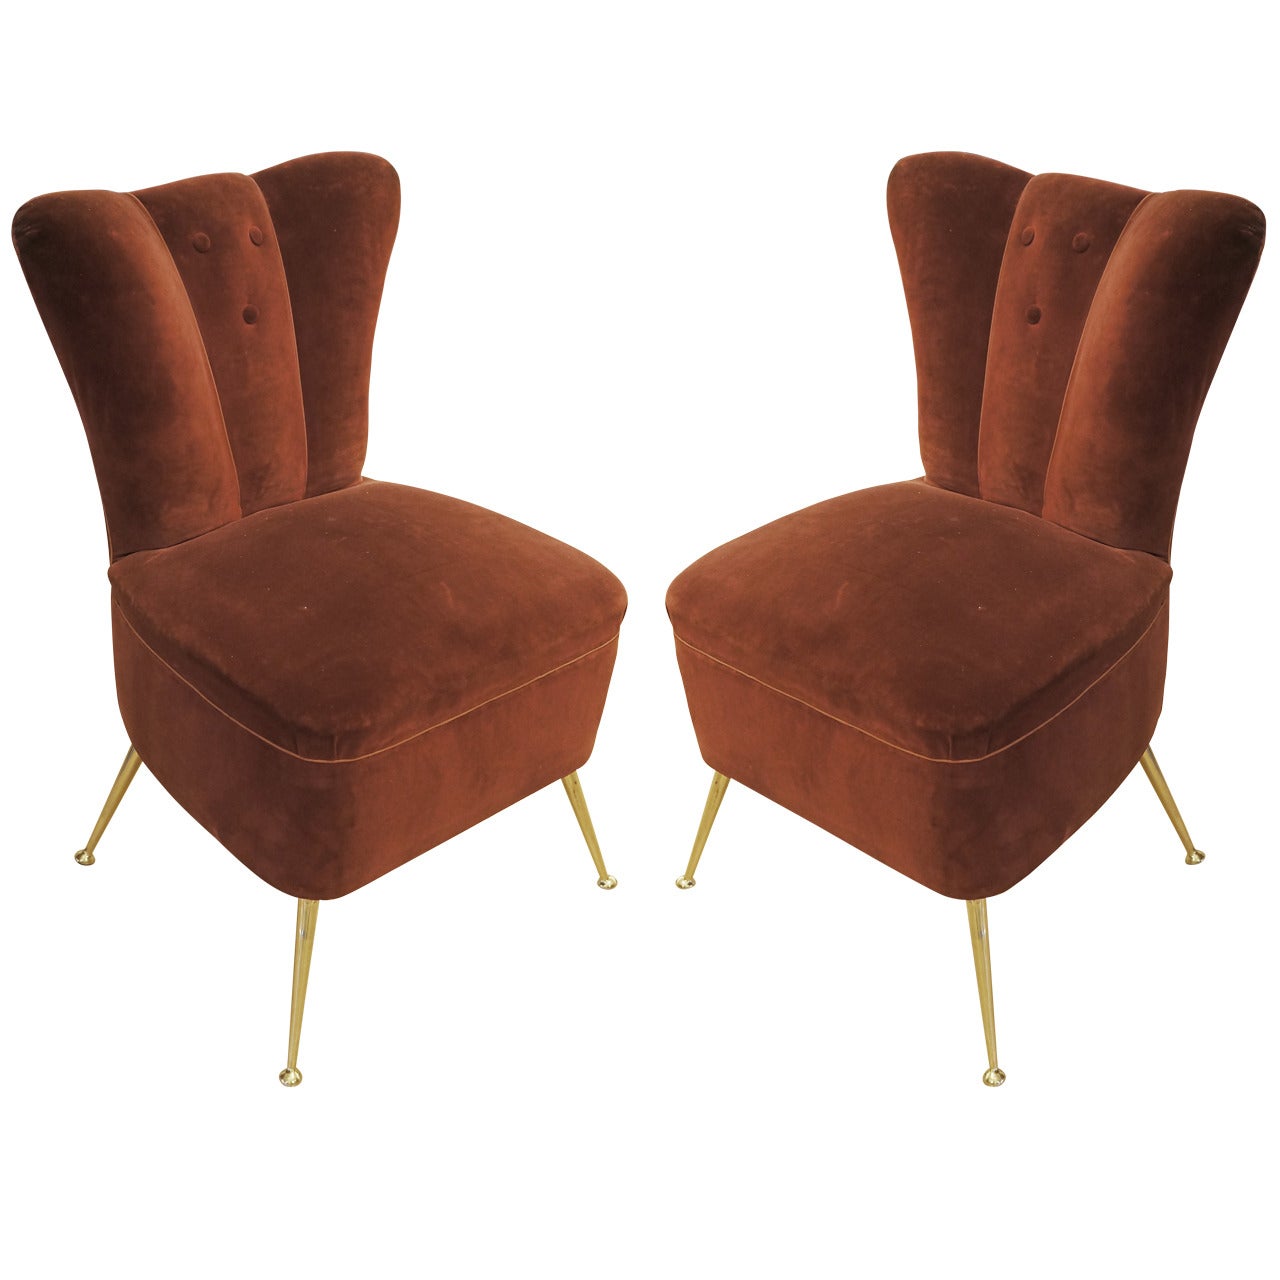 Pair of Slipper Chairs, Italy 1950s